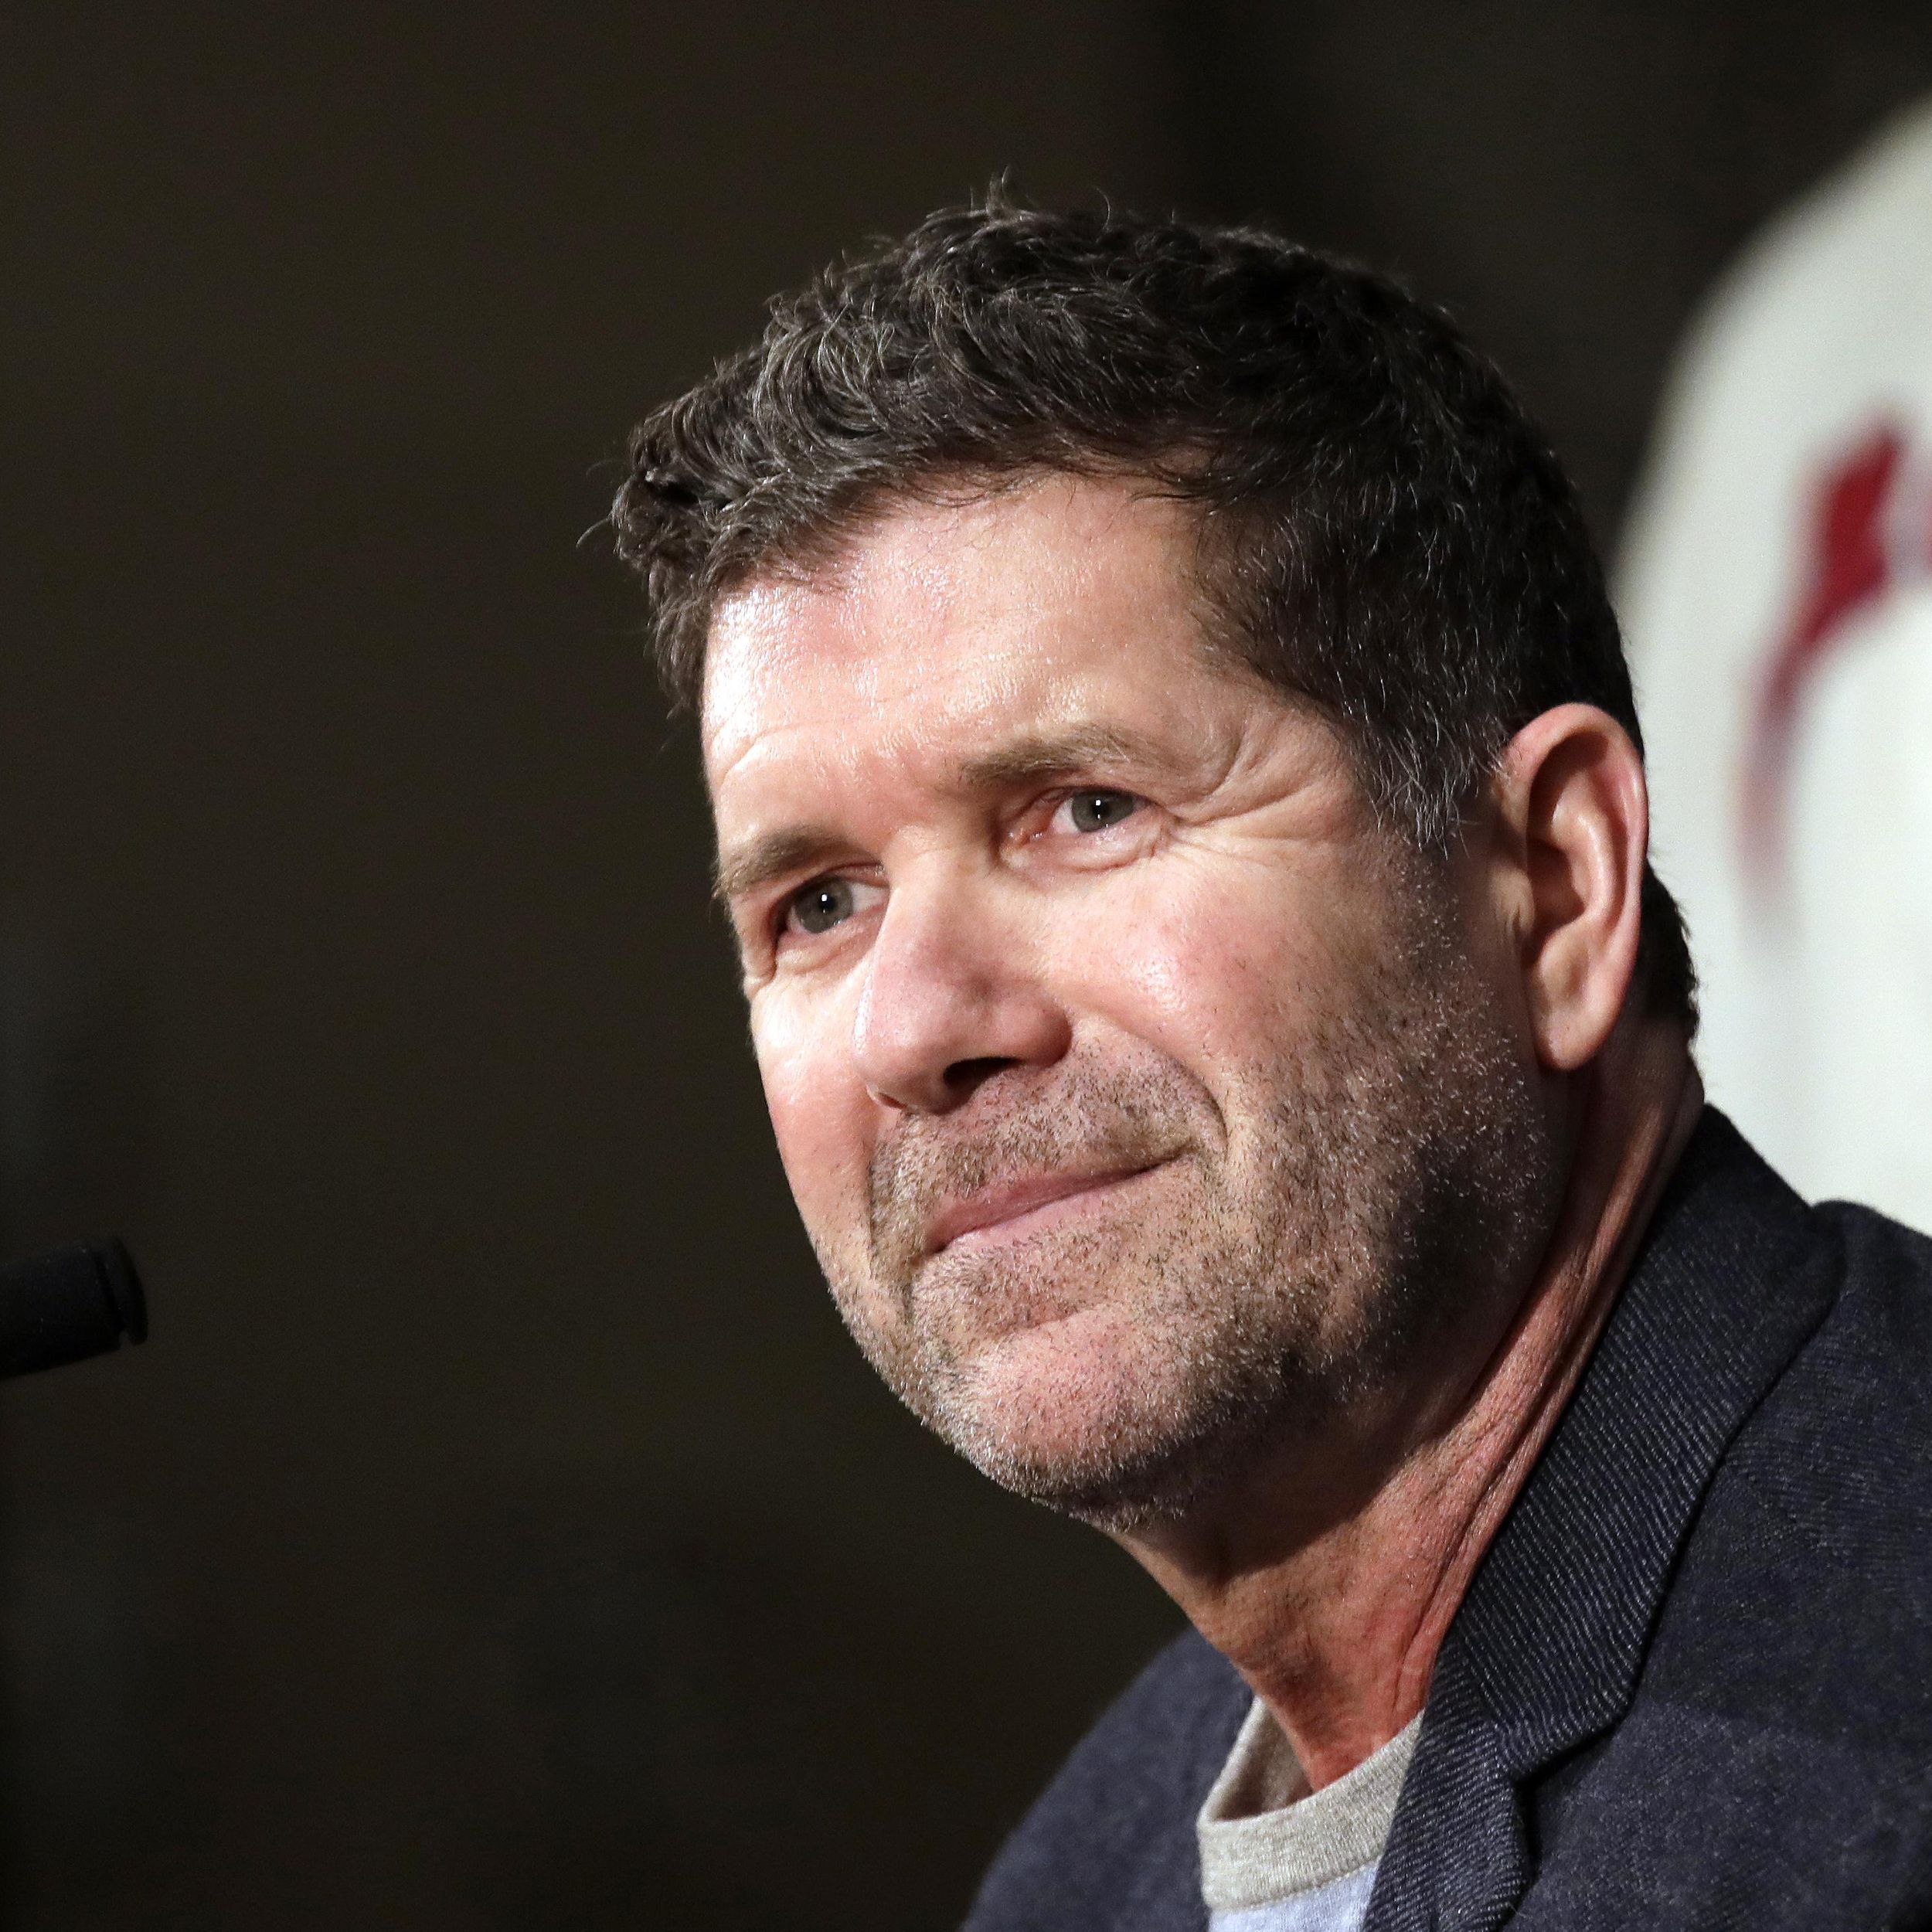 Larry Stone: It's time to put Edgar Martinez in the Hall of Fame — and  these stats prove it